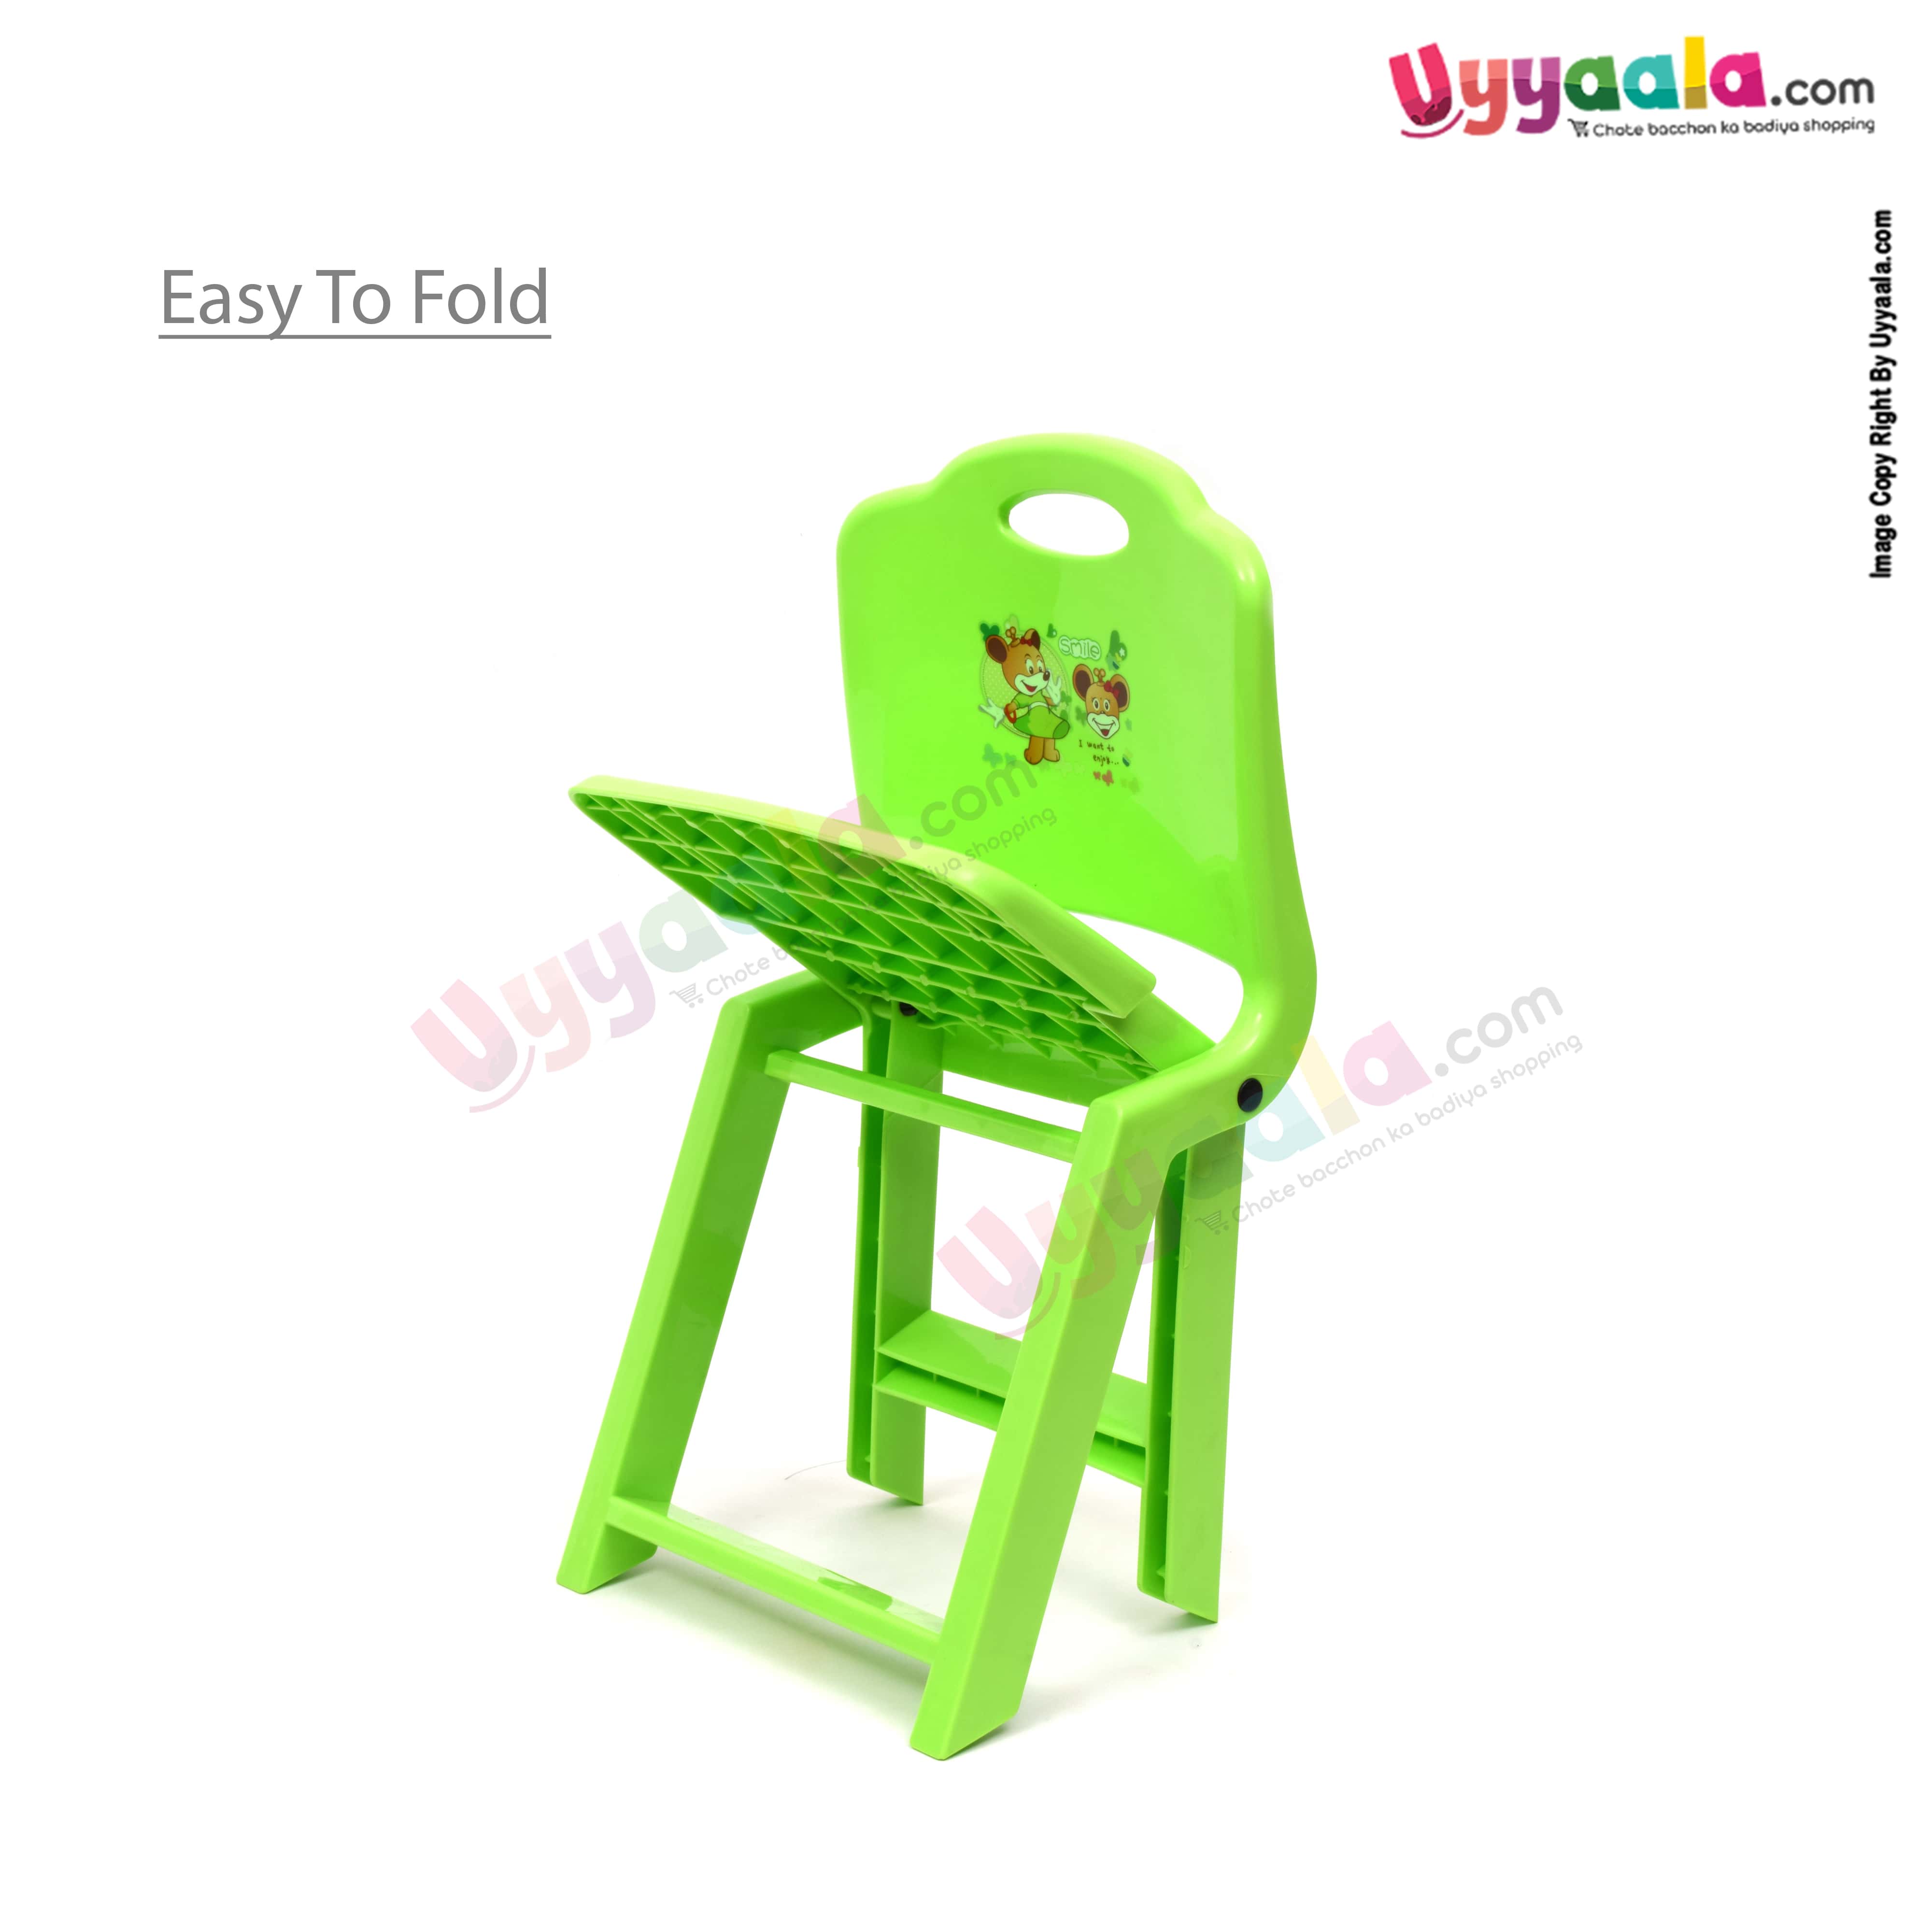 SMILE folding chair for kids micky mouse print - Green